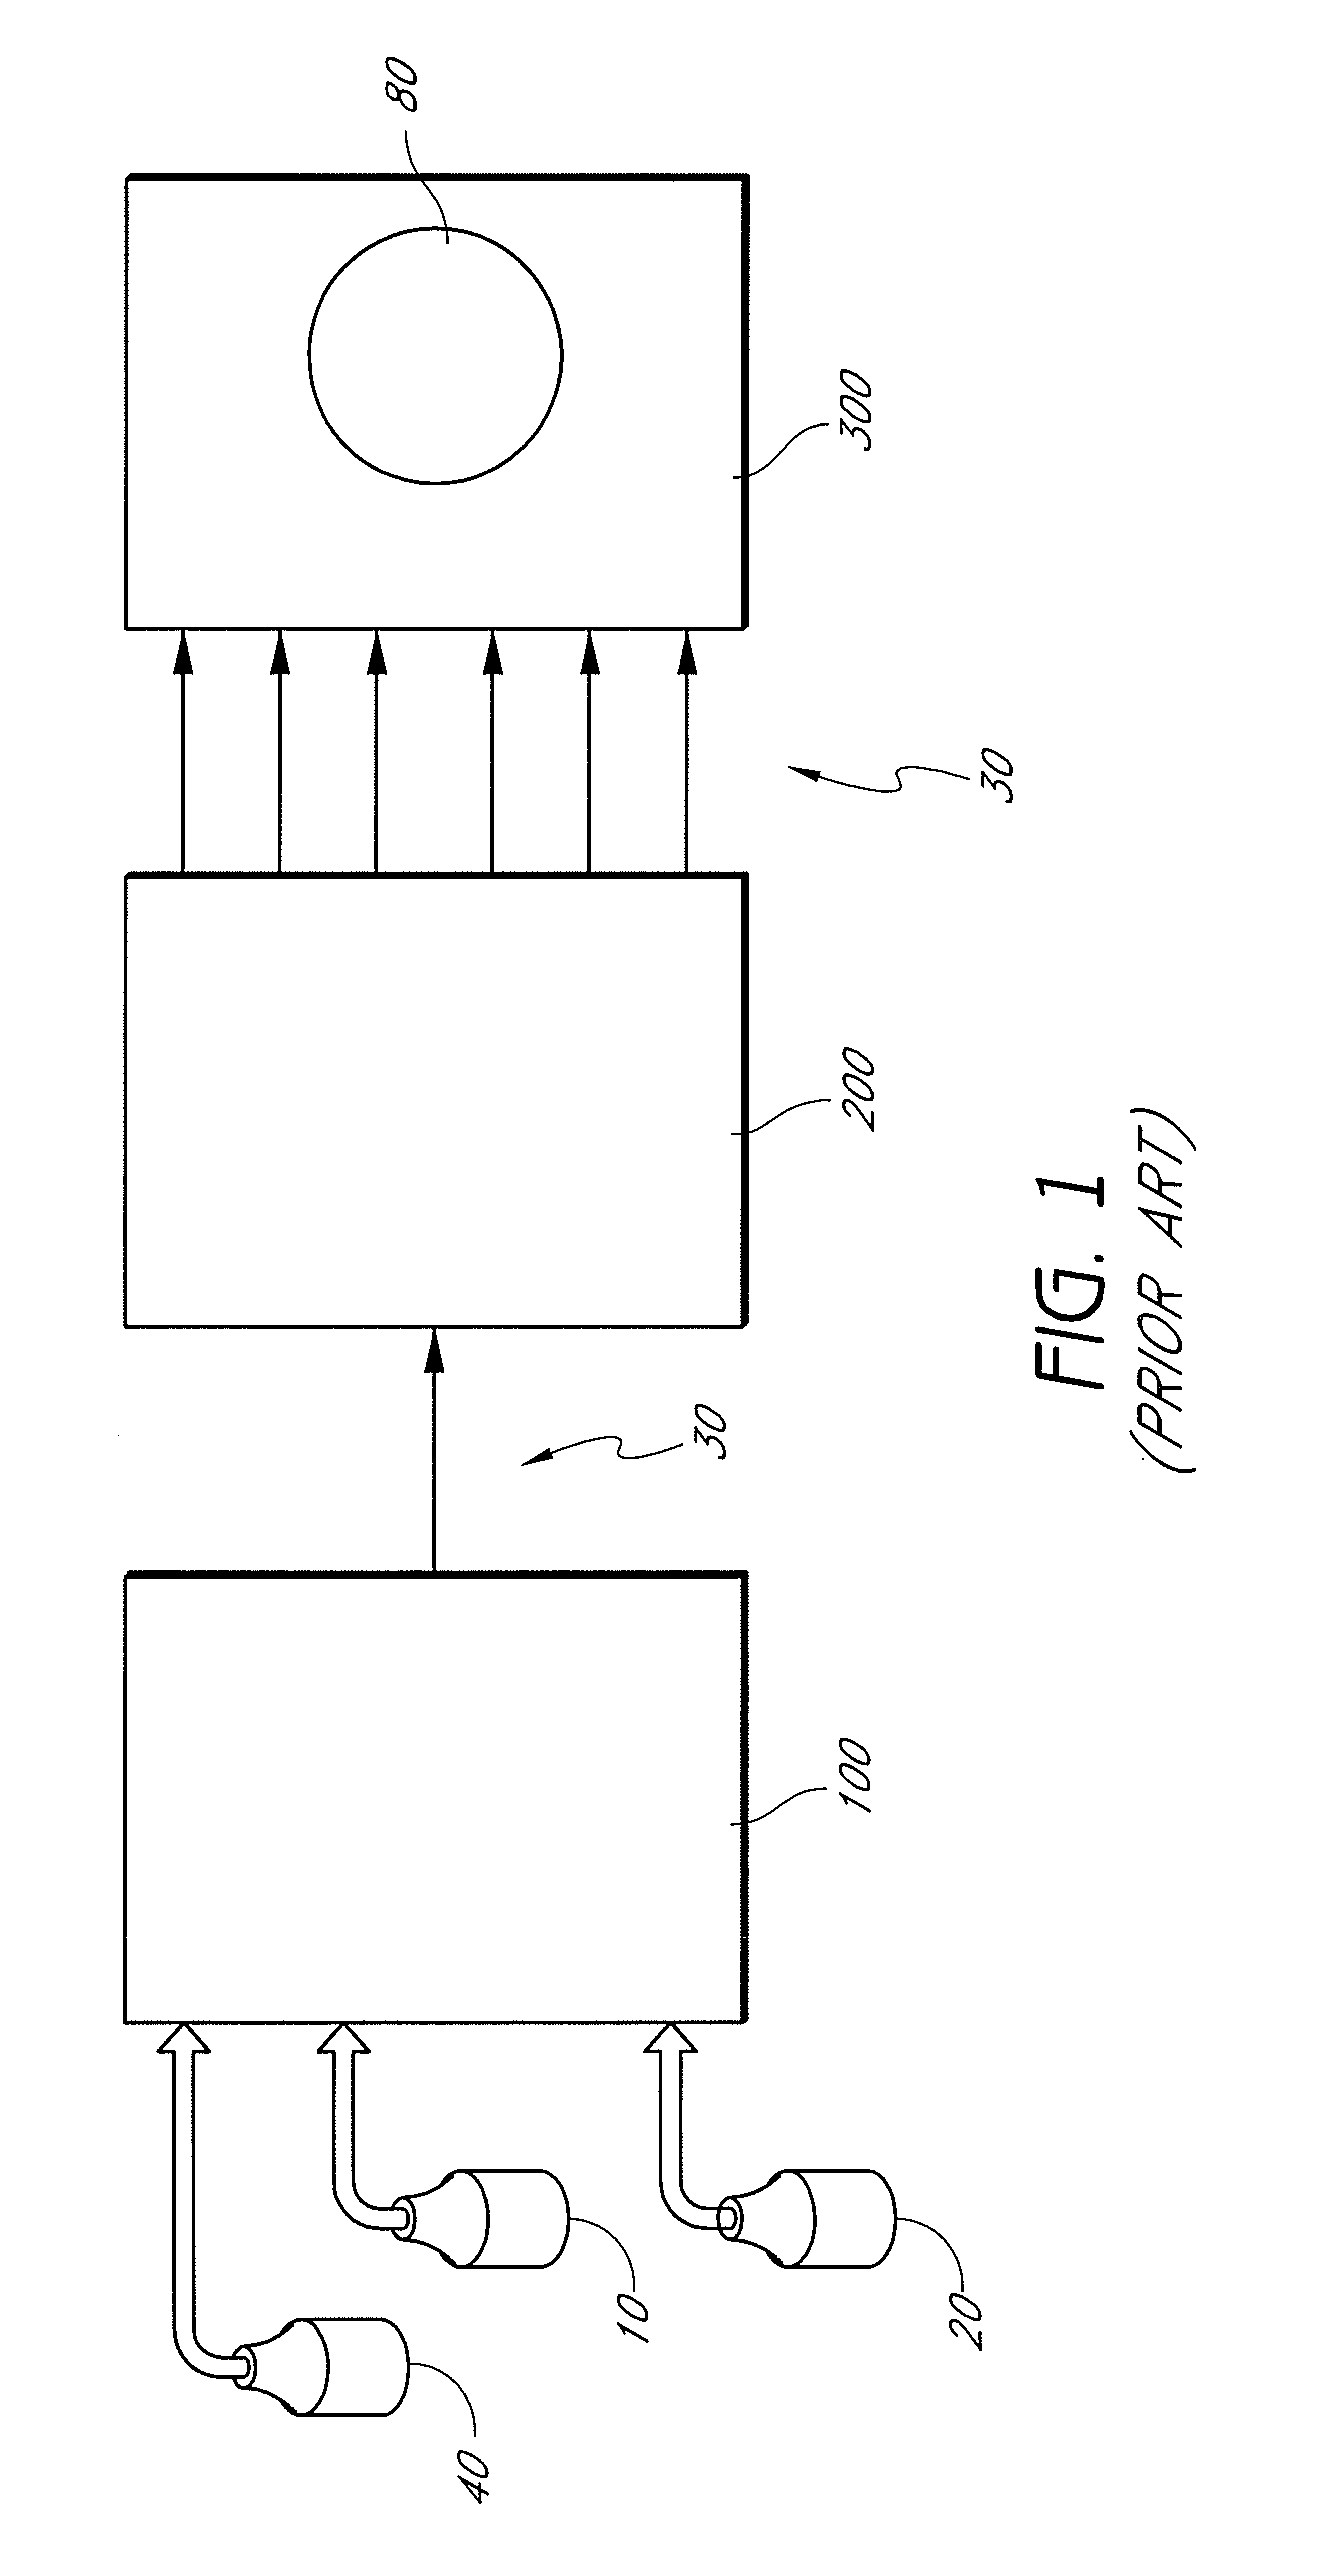 Substrate reactor with adjustable injectors for mixing gases within reaction chamber